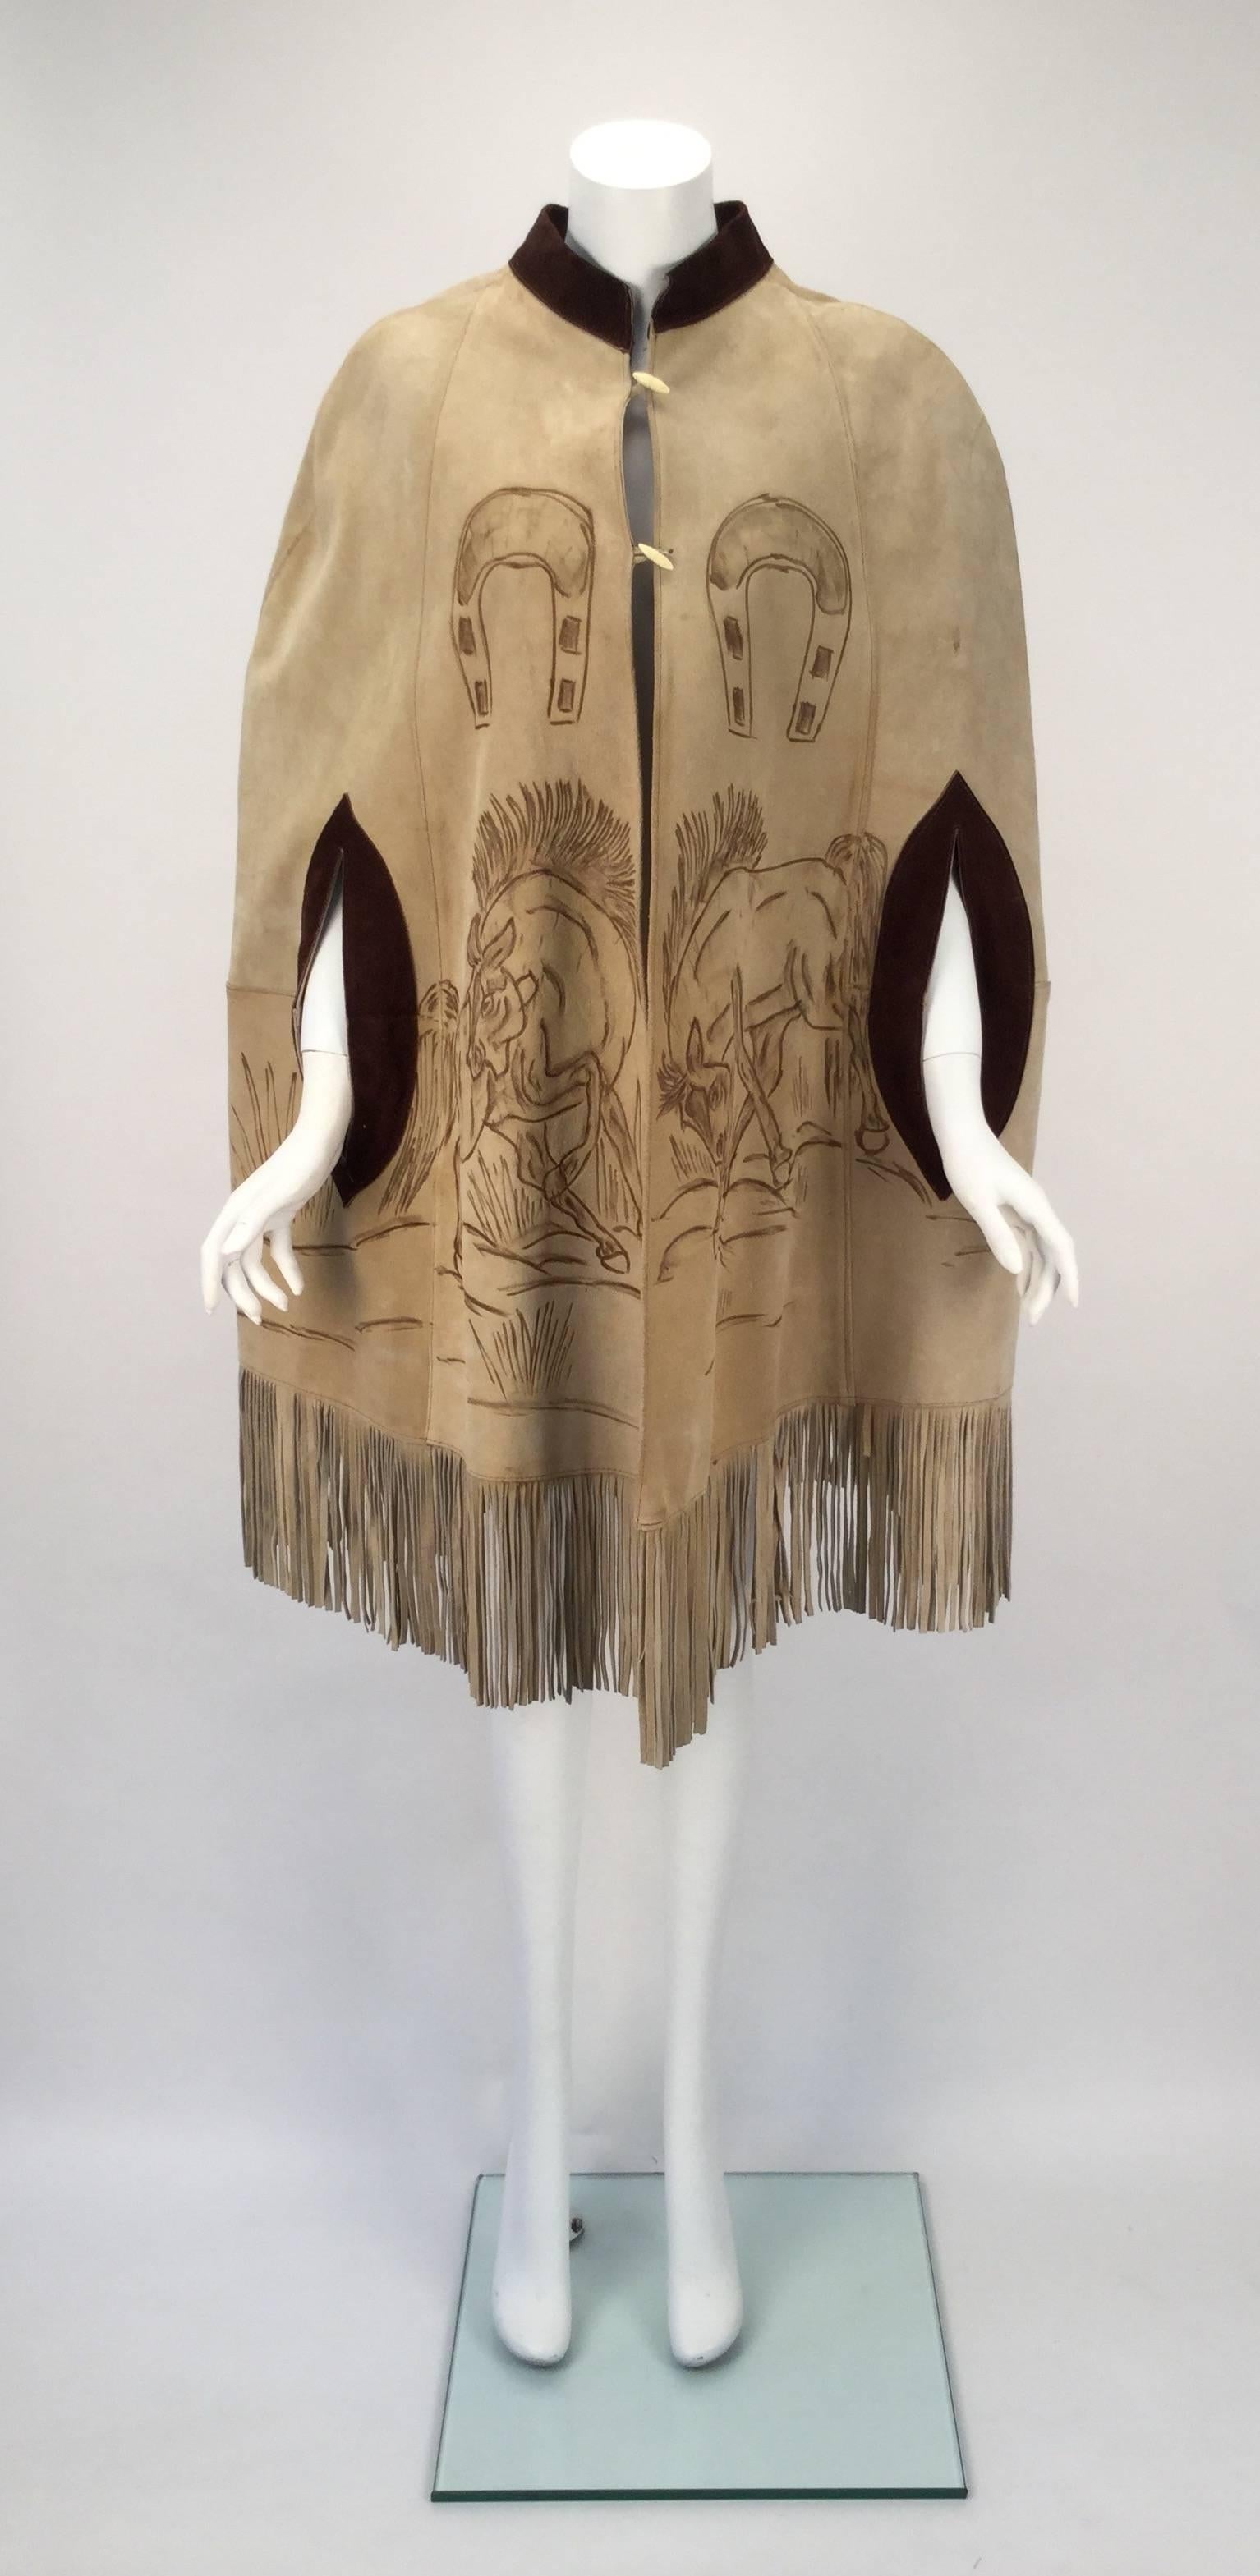 Gomez R hand drawn suede poncho, made in Guadalajara, Mexico. Gomez the brand was known for both its quality leather work and for drawing one of a kind scenes. This amazing poncho features a galloping horse and horseshoe scene. The poncho has a